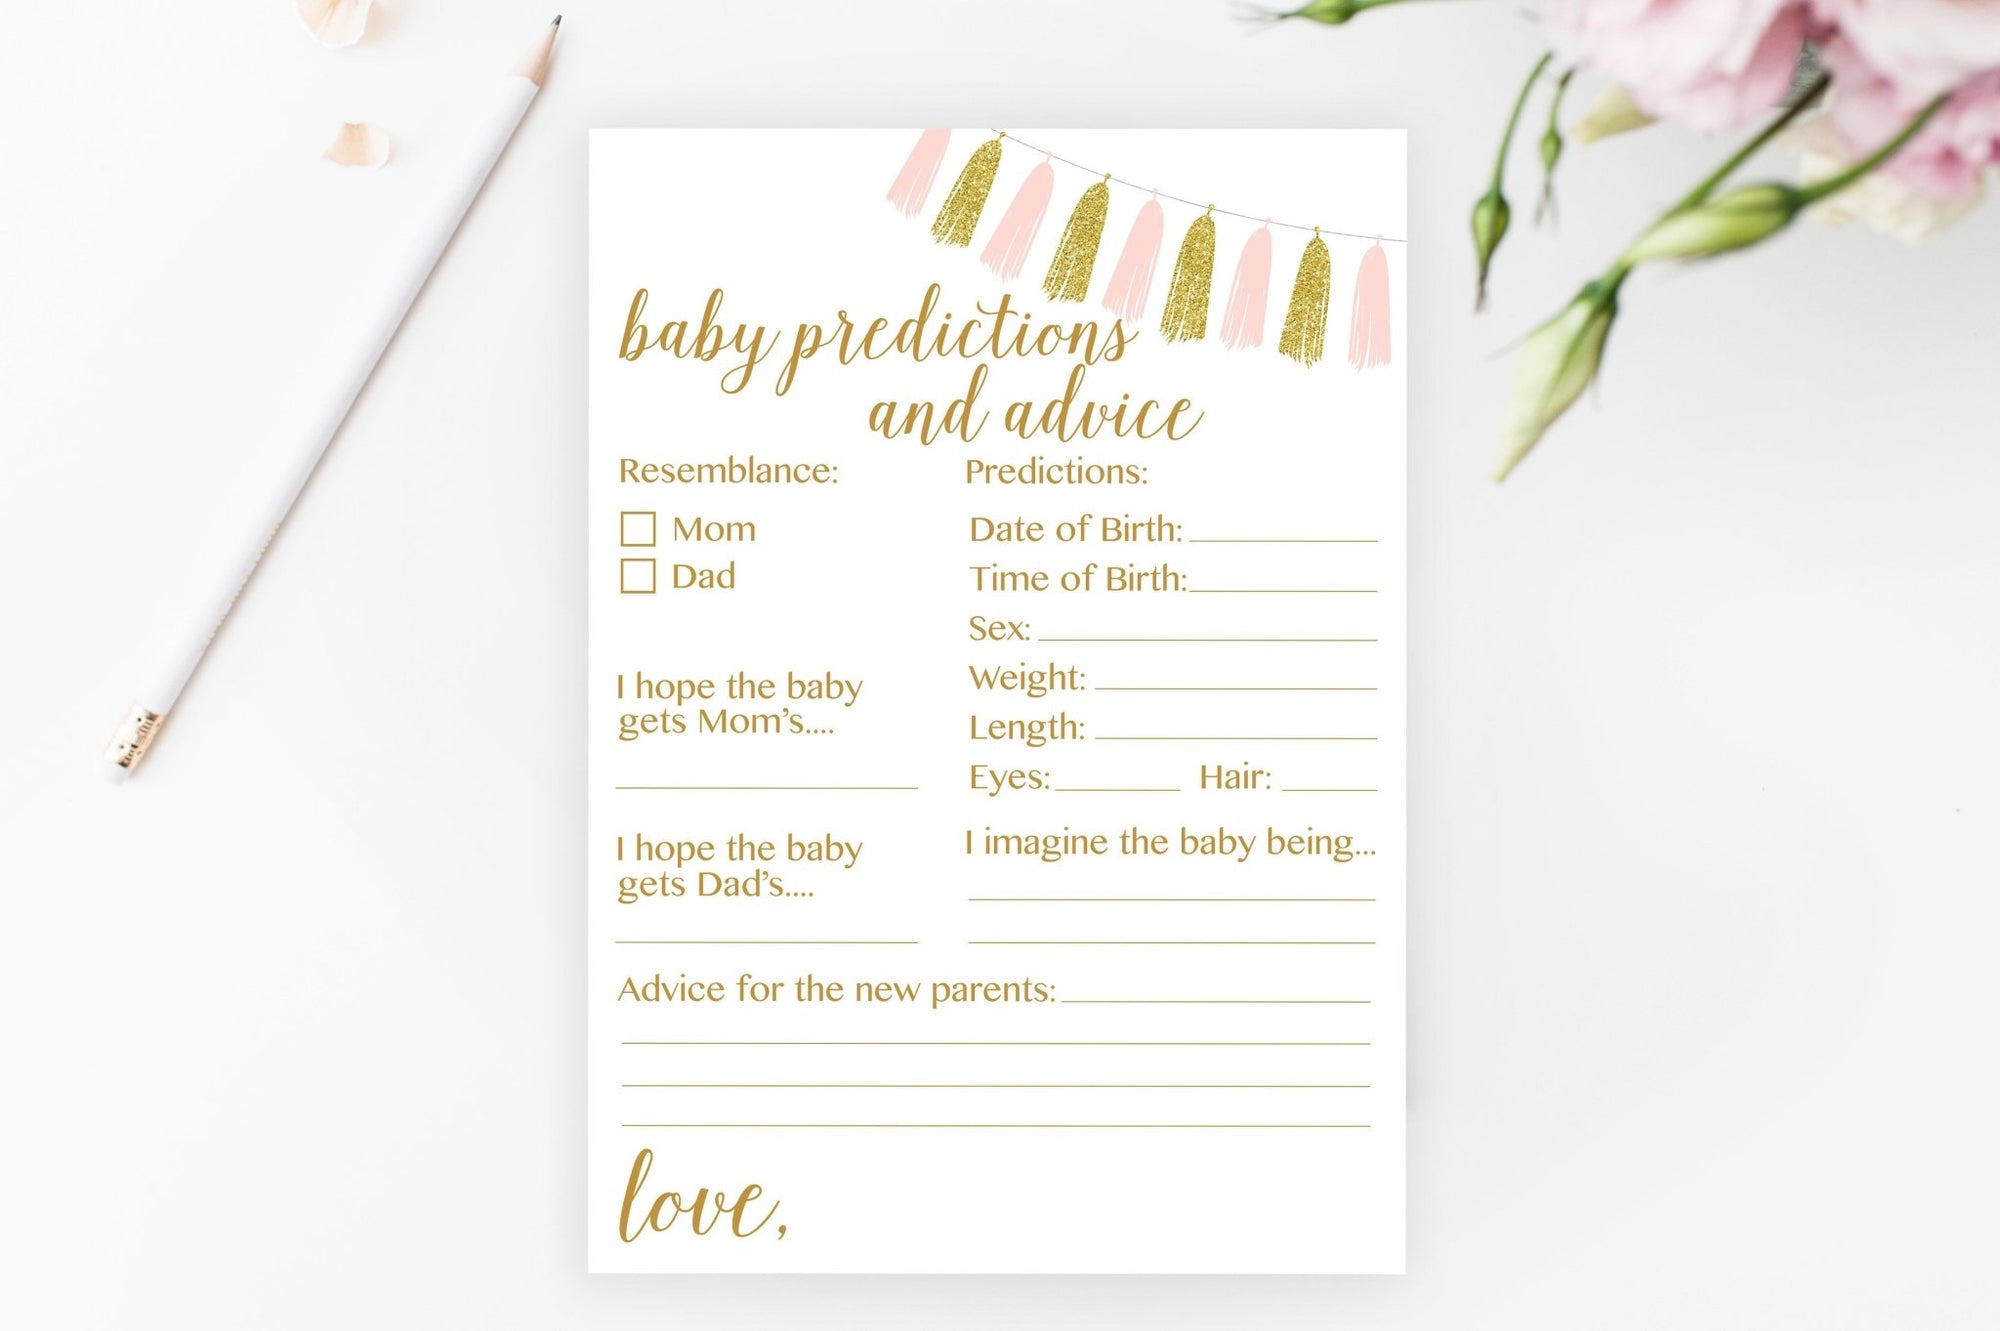 Baby Predictions and Advice (with Sex) - Pink & Gold Tassel Printable - Pretty Collected